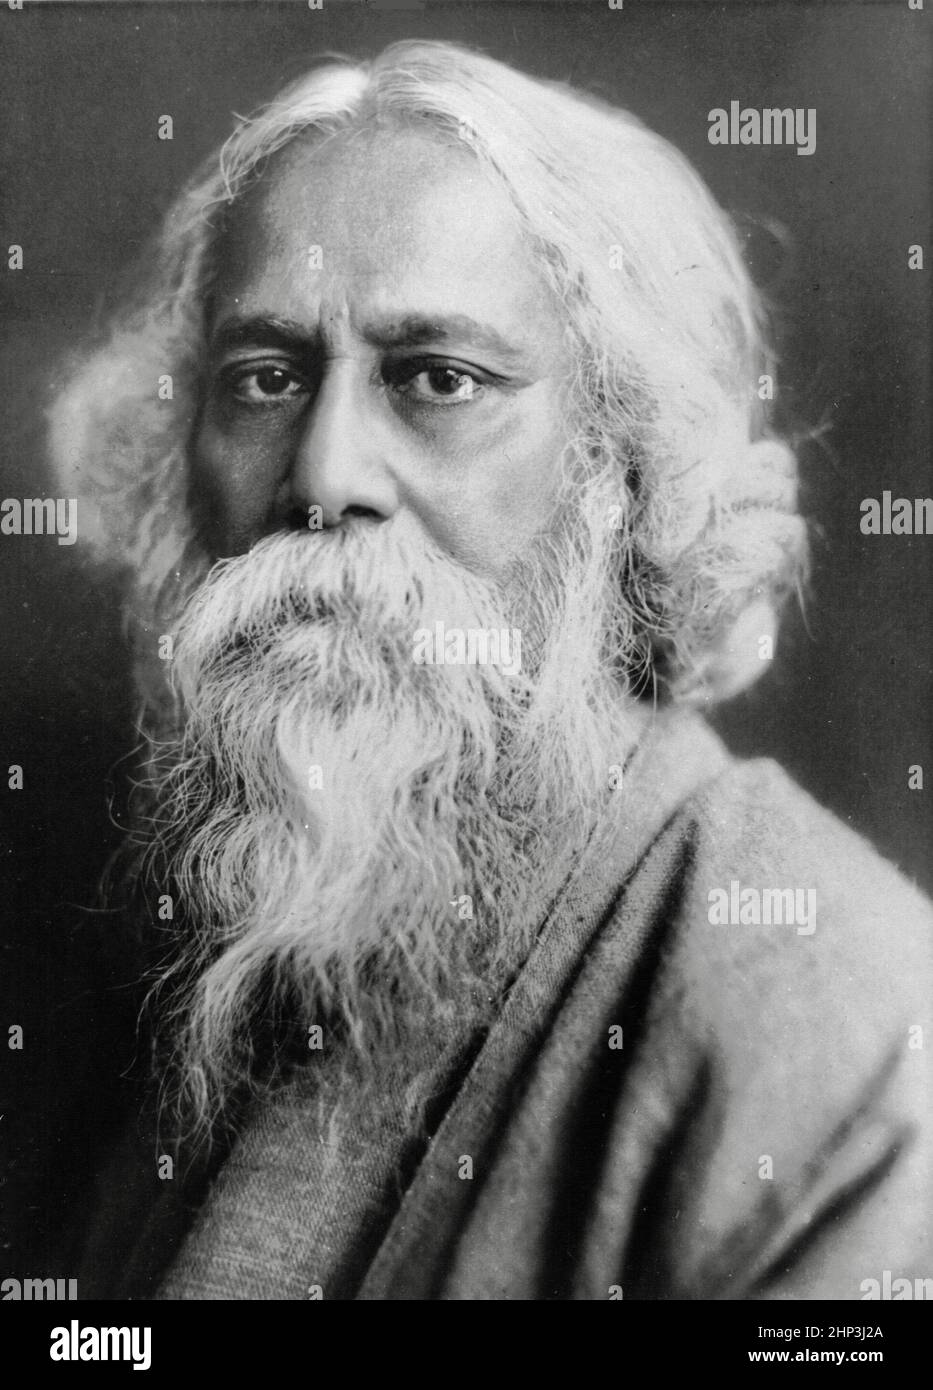 Rabindranath Tagore -  Bengali poet, writer, playwright, composer, philosopher, social reformer and painter. Stock Photo